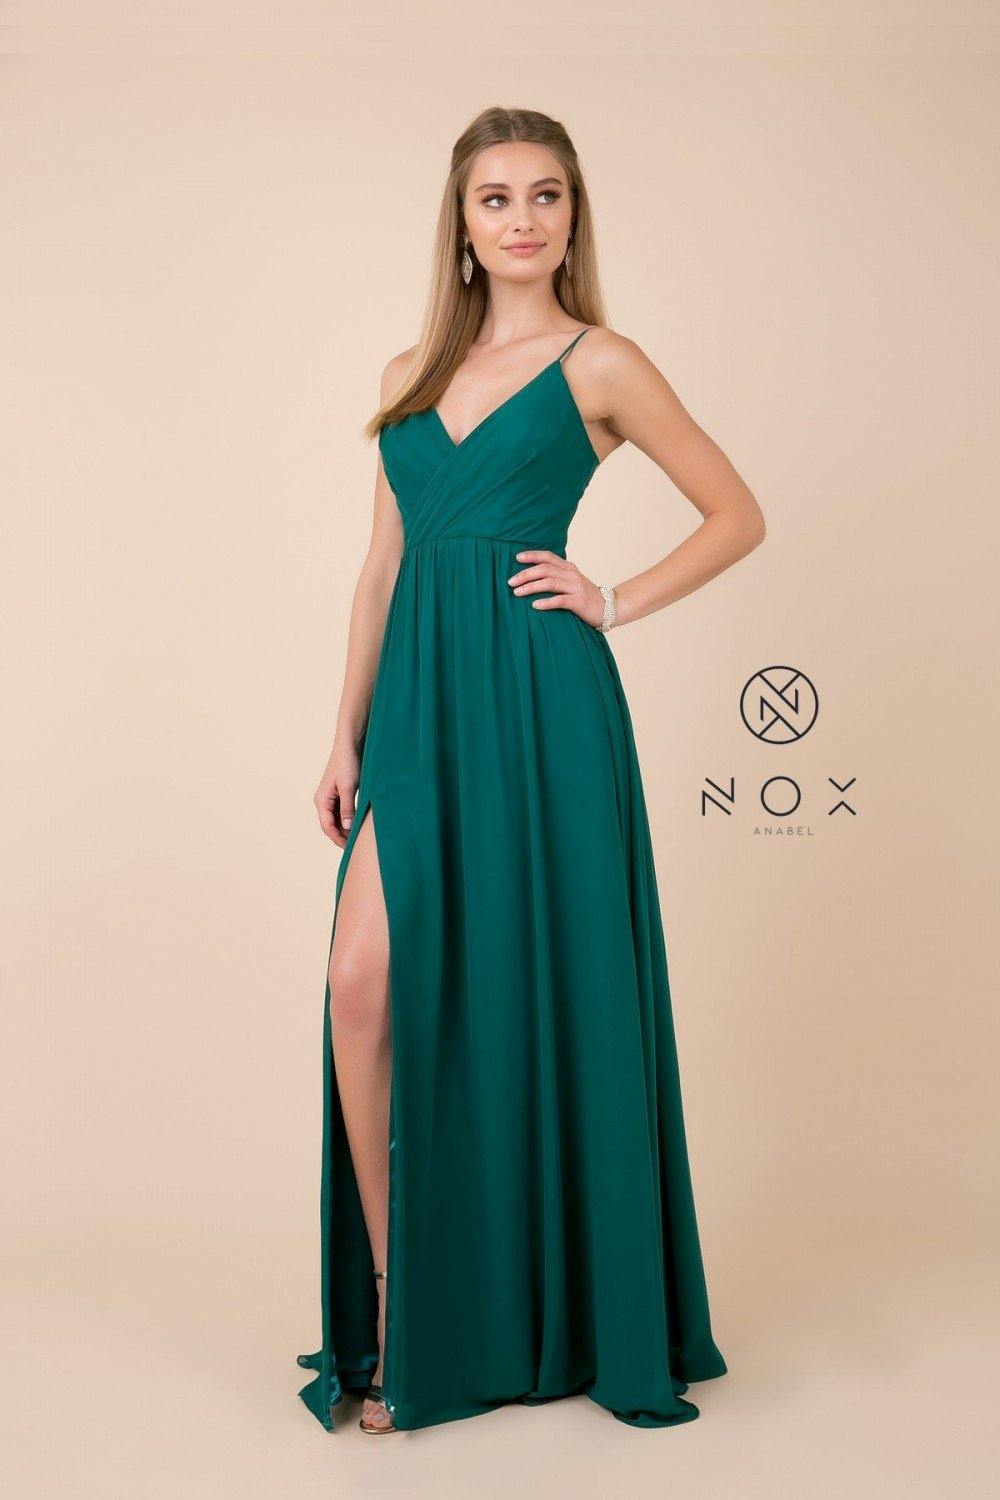 Long Sleeveless Formal Dress Bridesmaid - The Dress Outlet Nox Anabel